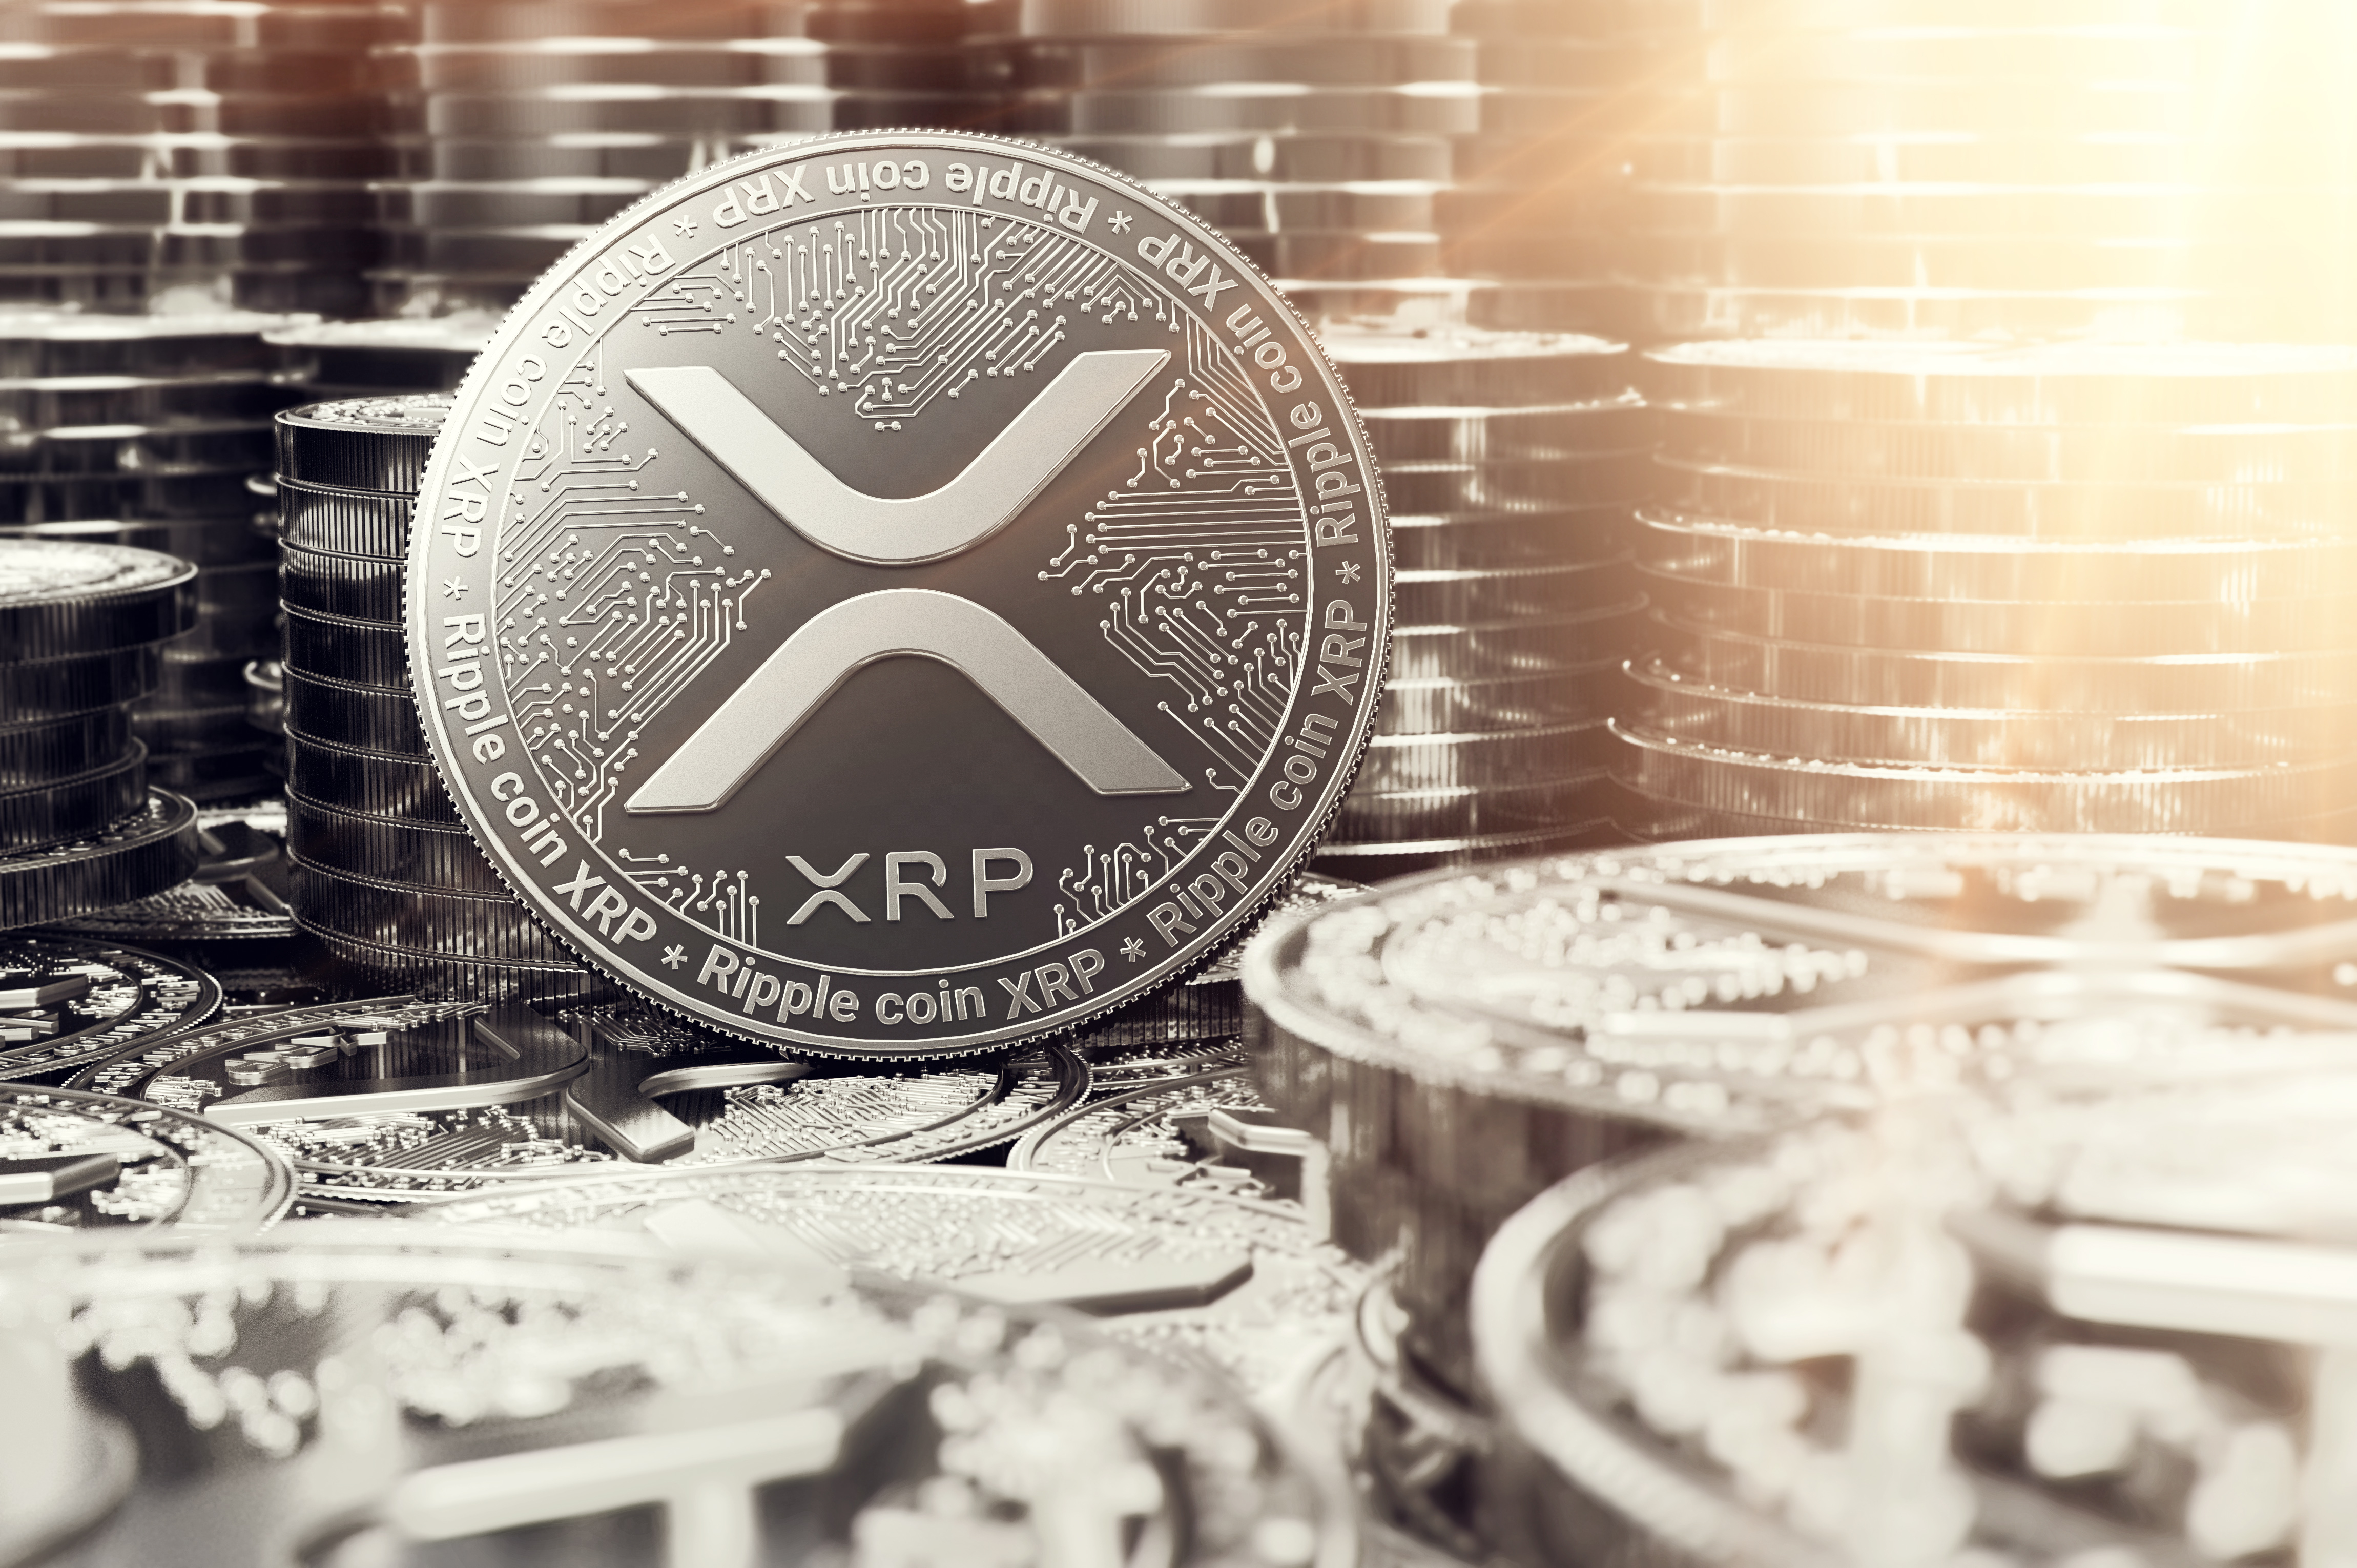 XRP Buy Signal That Resulted In 60% Rally Has Gone Off Again